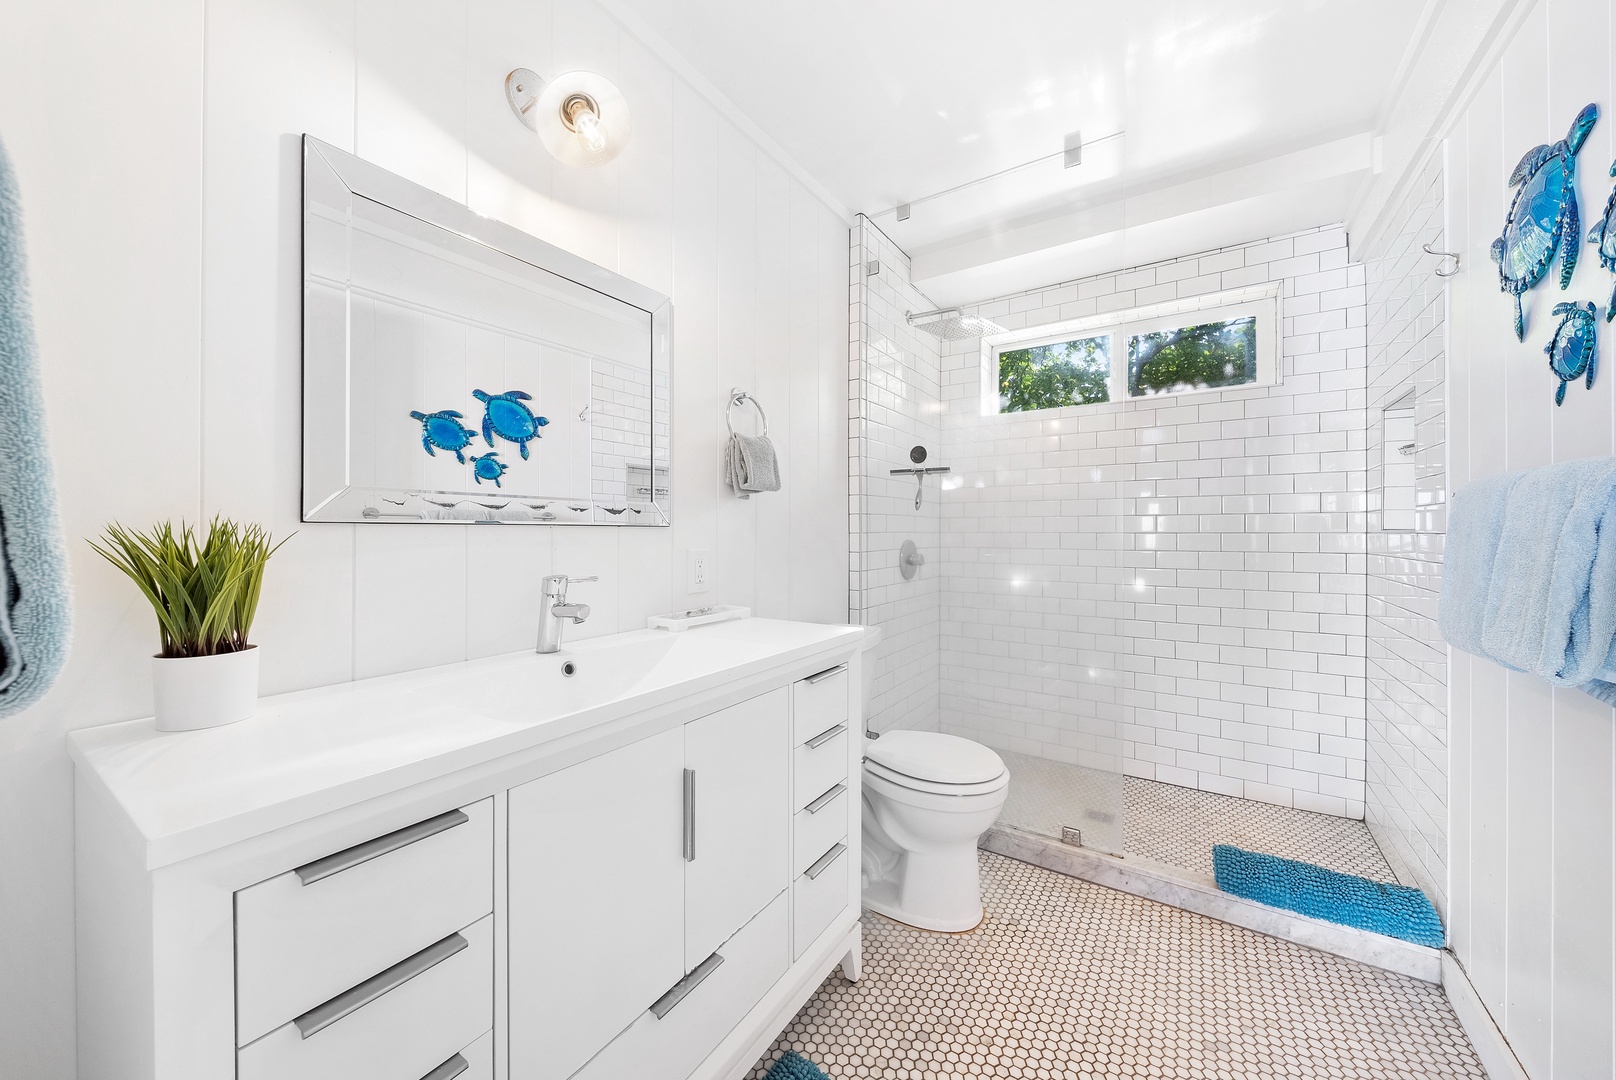 Haleiwa Vacation Rentals, Surfer's Paradise - Shared full bath in downstairs